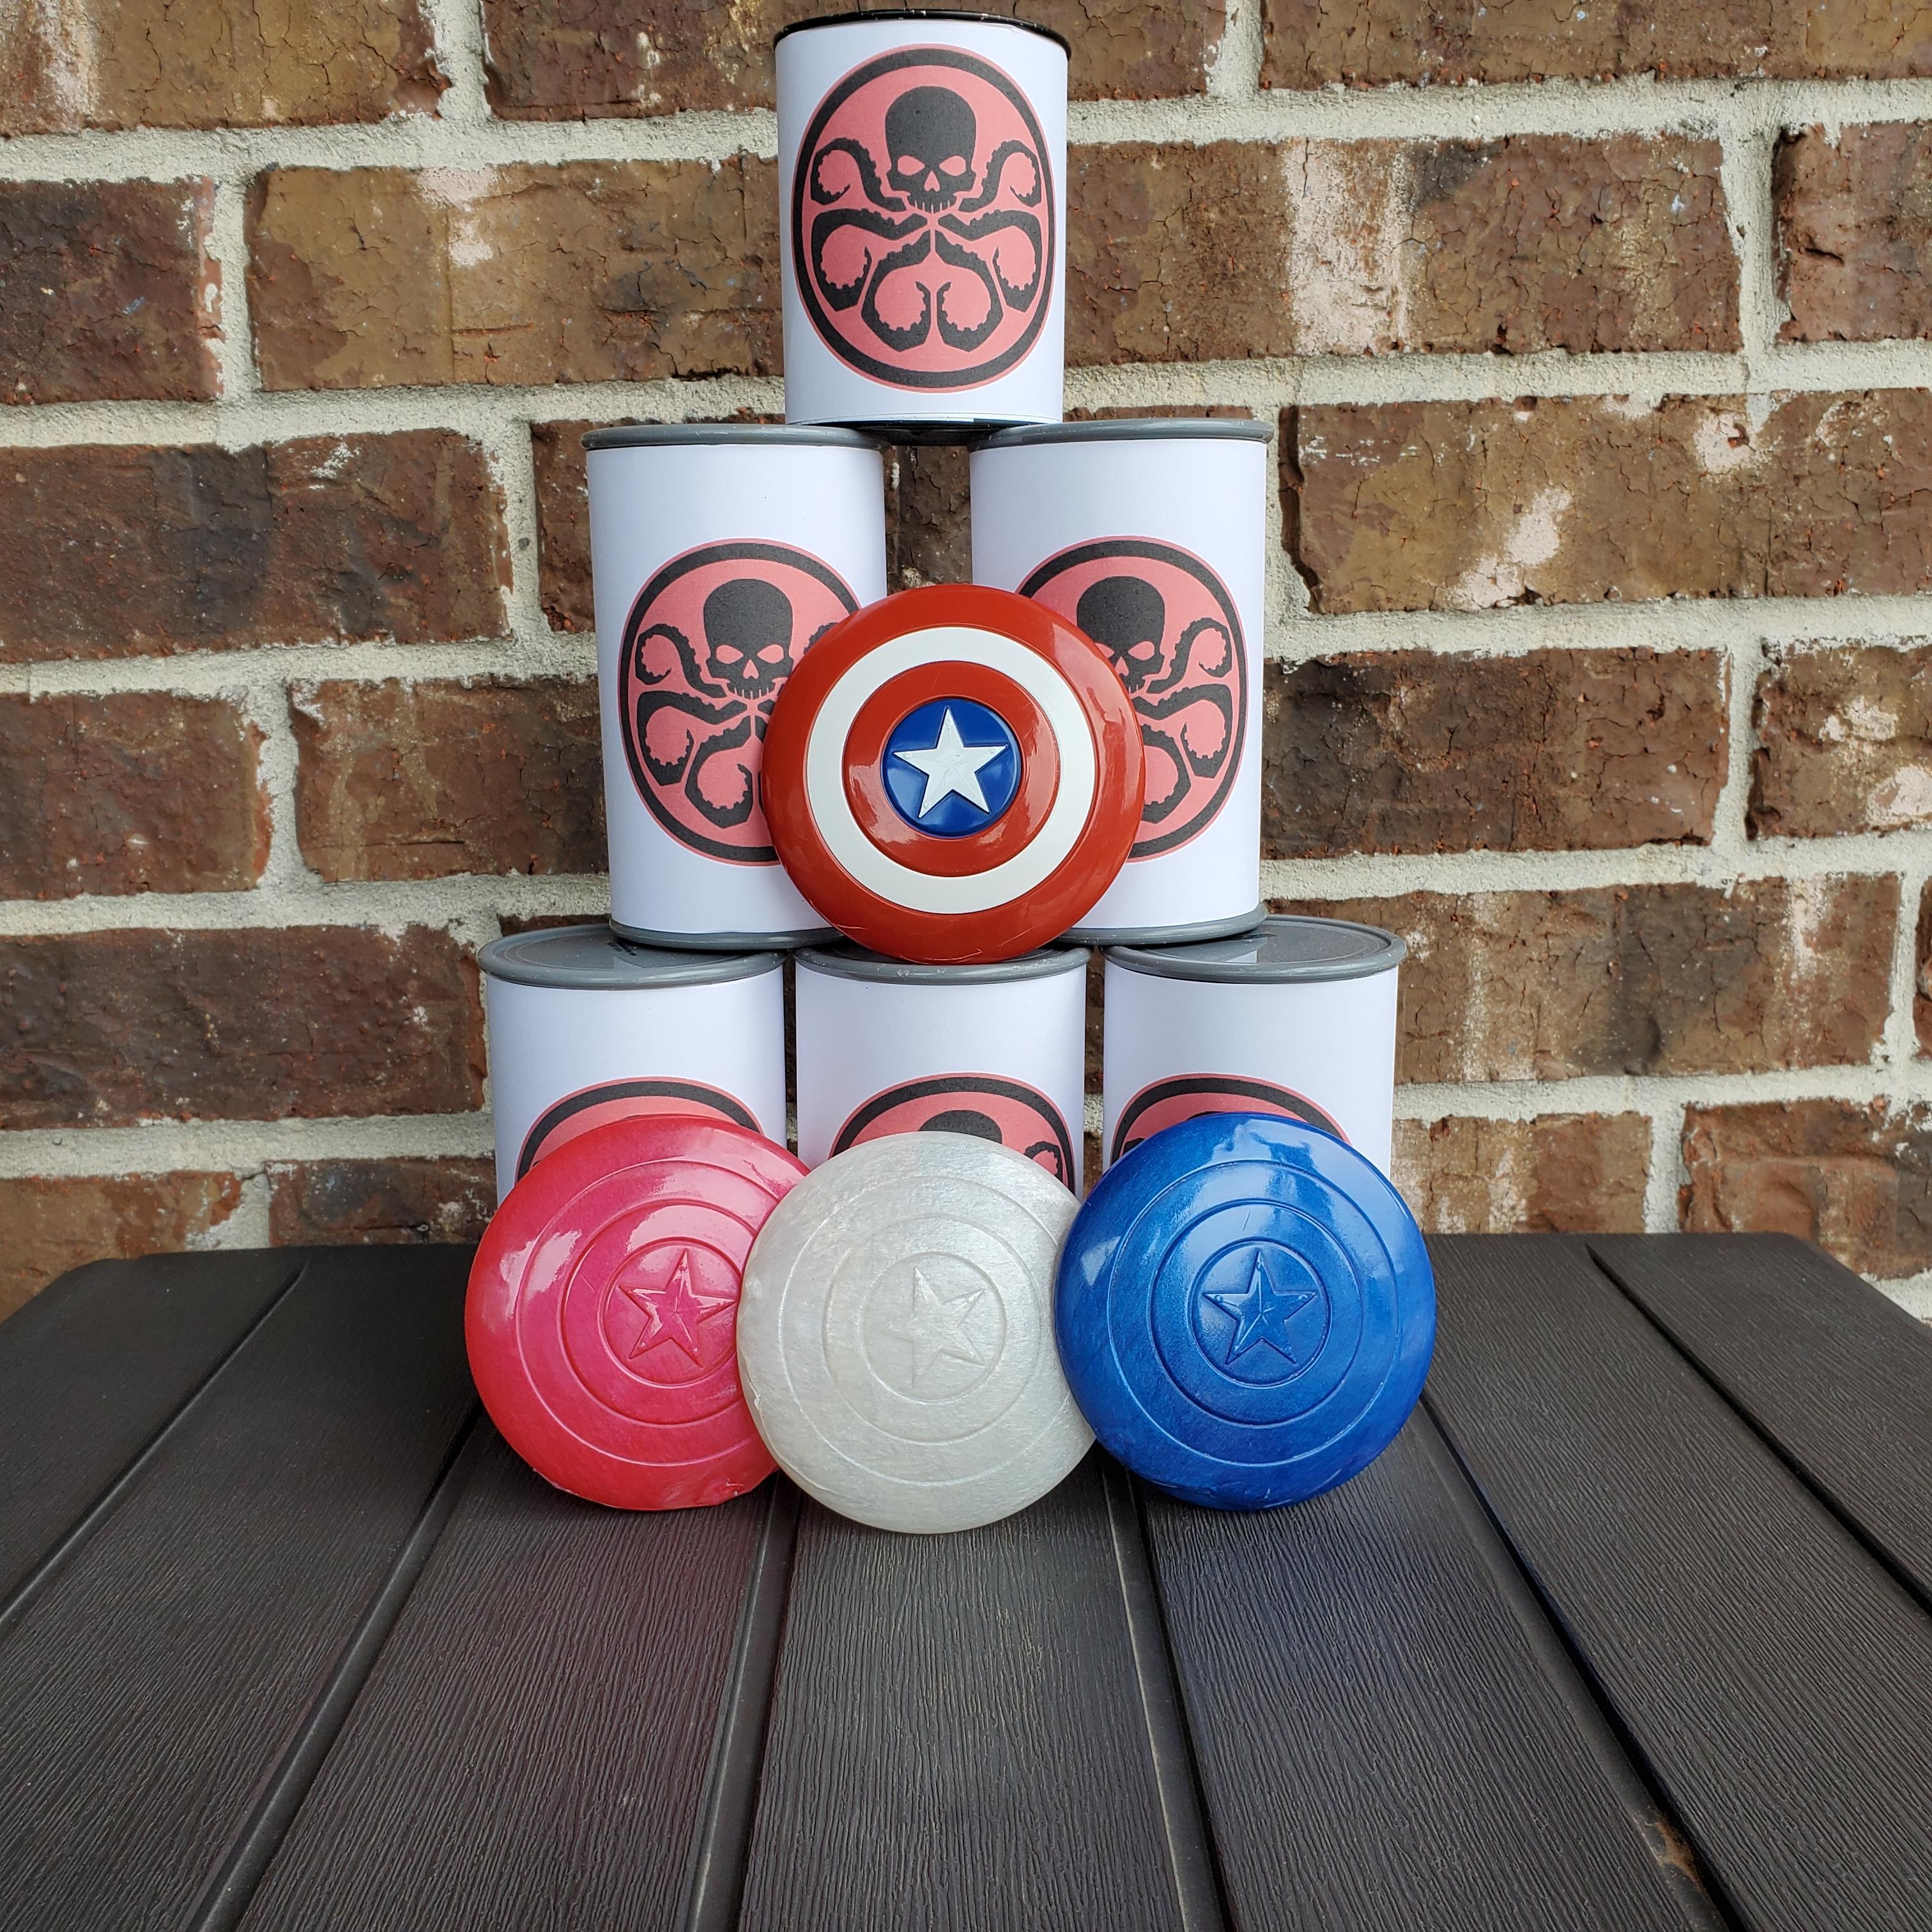 From Bean Bag Toss to Captain America Shield Toss Game